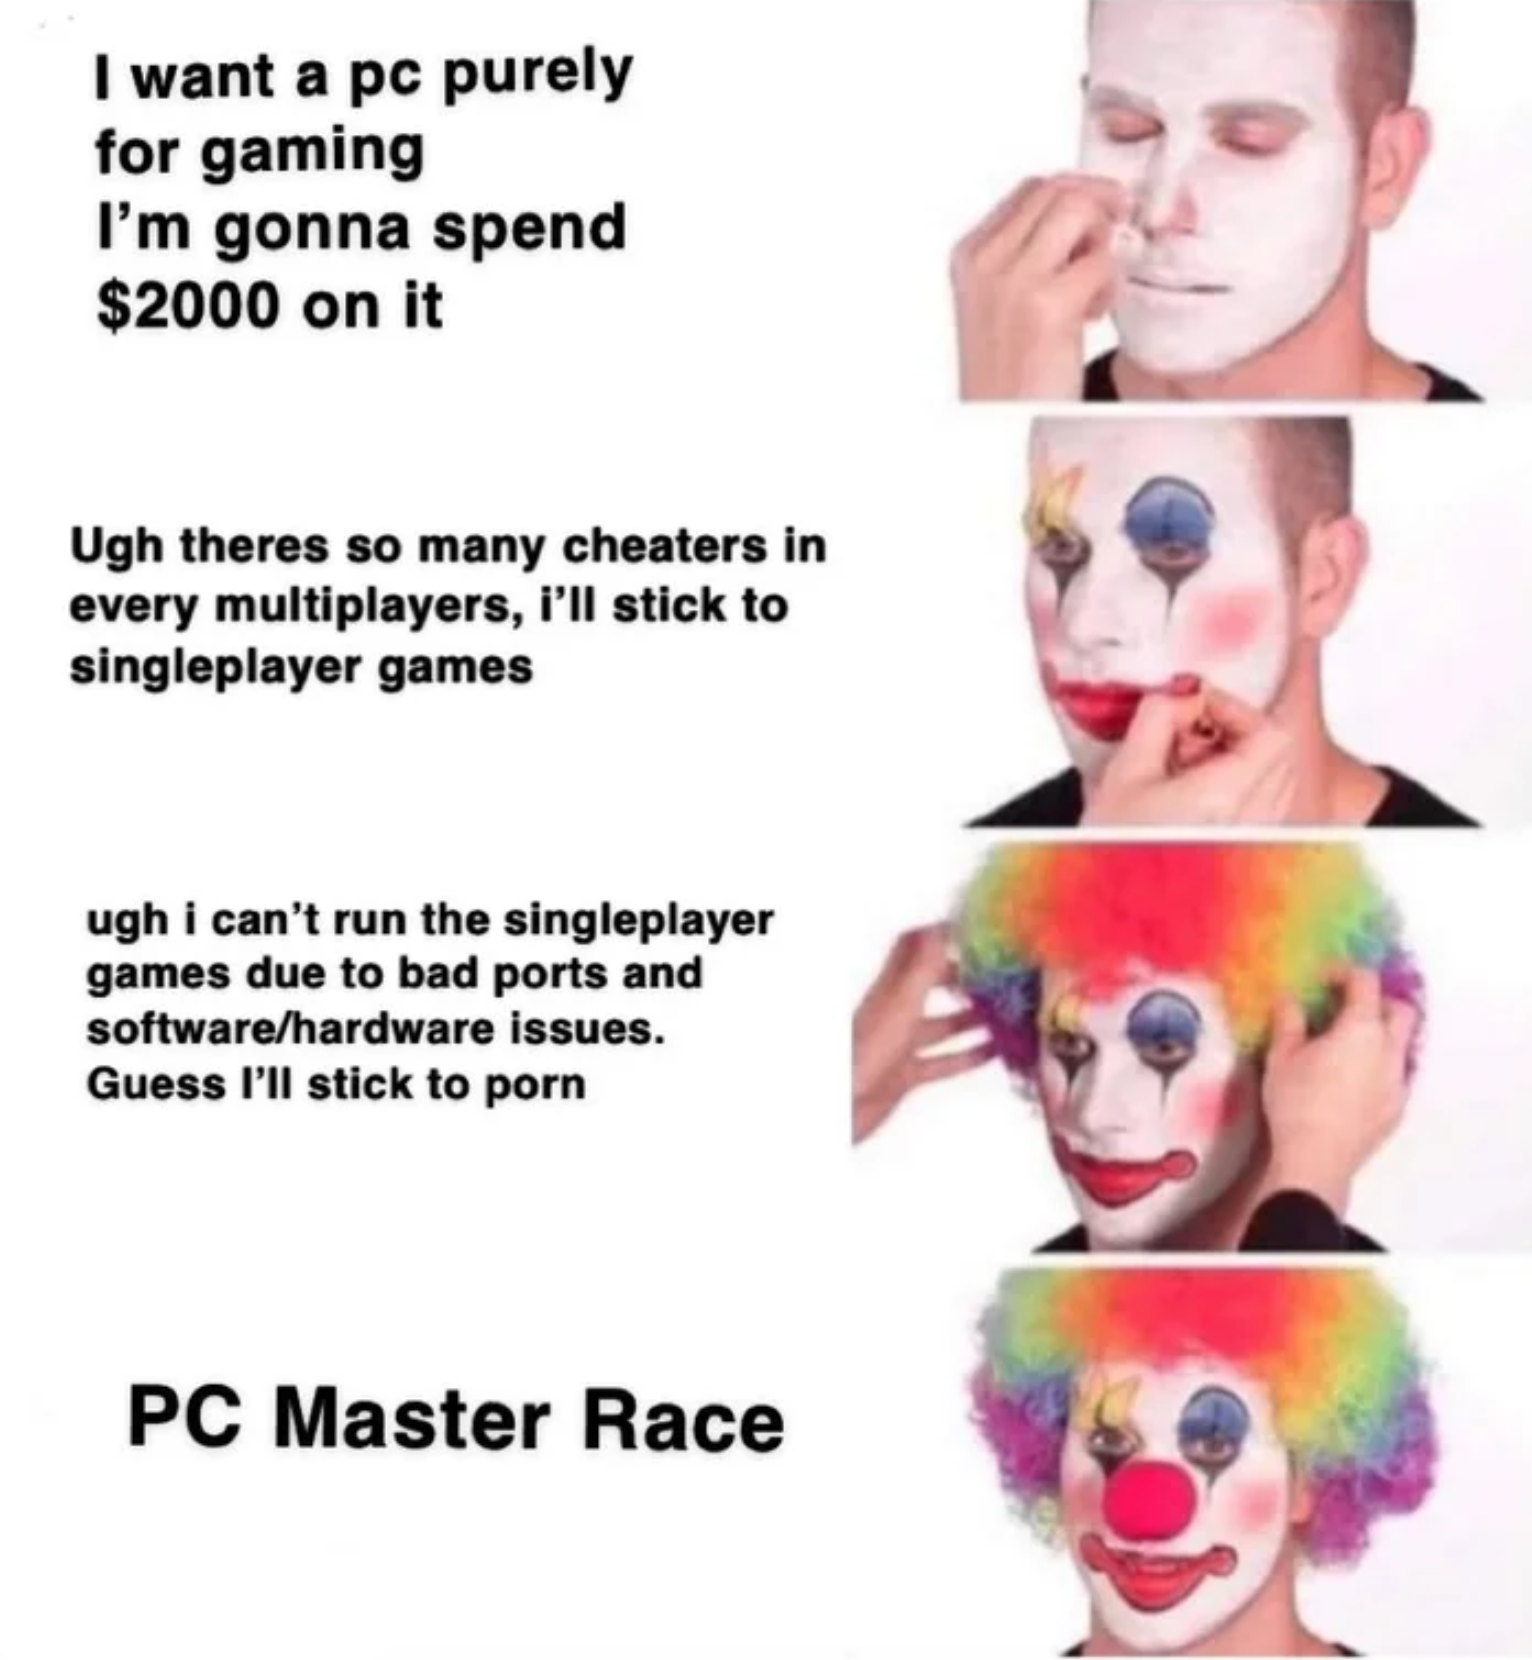 funny gaming memes - bone hurting juice - I want a pc purely for gaming I'm gonna spend $2000 on it Ugh theres so many cheaters in every multiplayers, I'll stick to singleplayer games ugh i can't run the singleplayer games due to bad ports and softwarehar